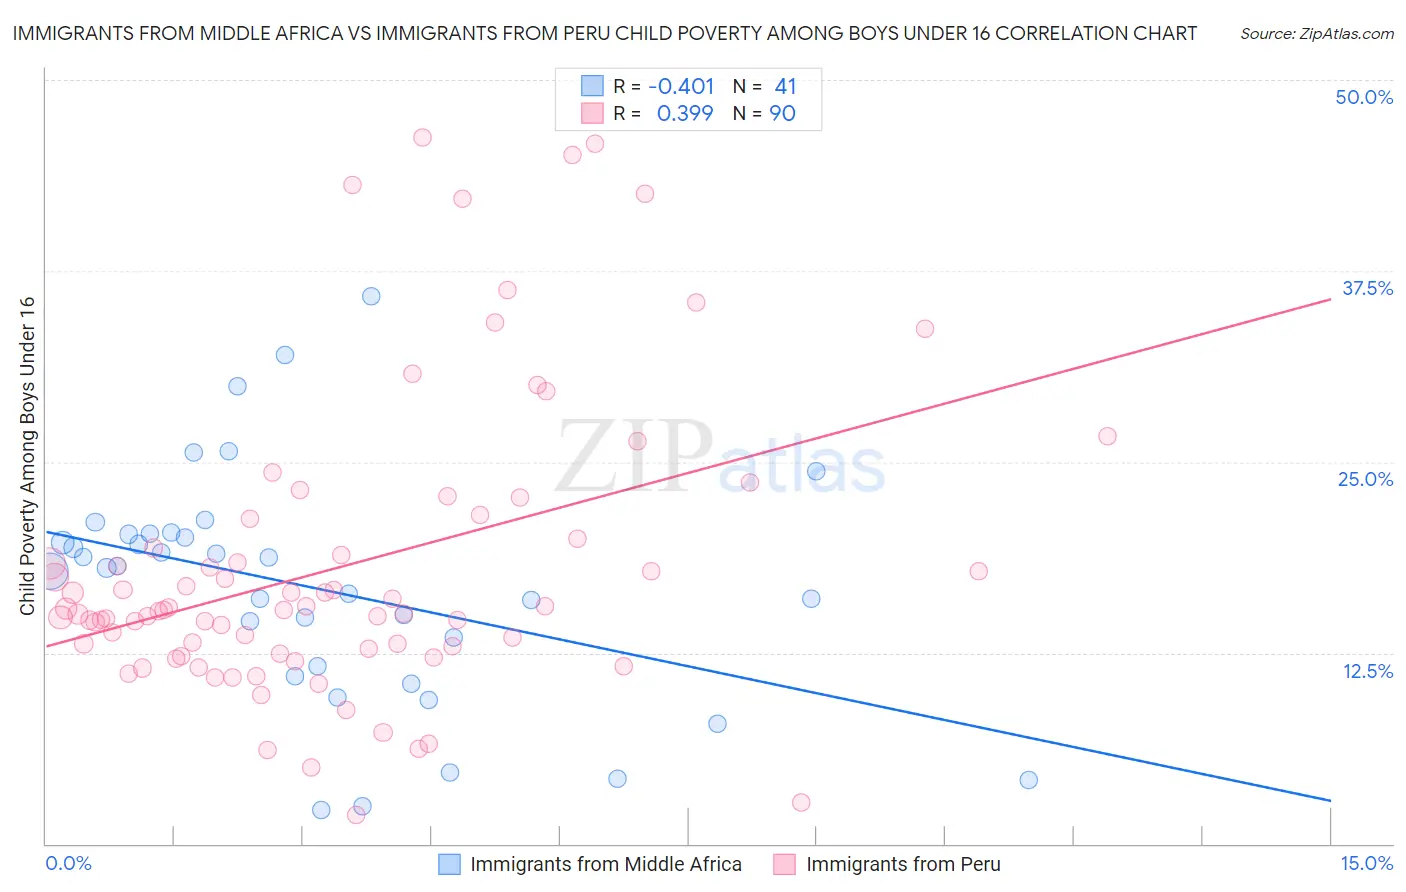 Immigrants from Middle Africa vs Immigrants from Peru Child Poverty Among Boys Under 16